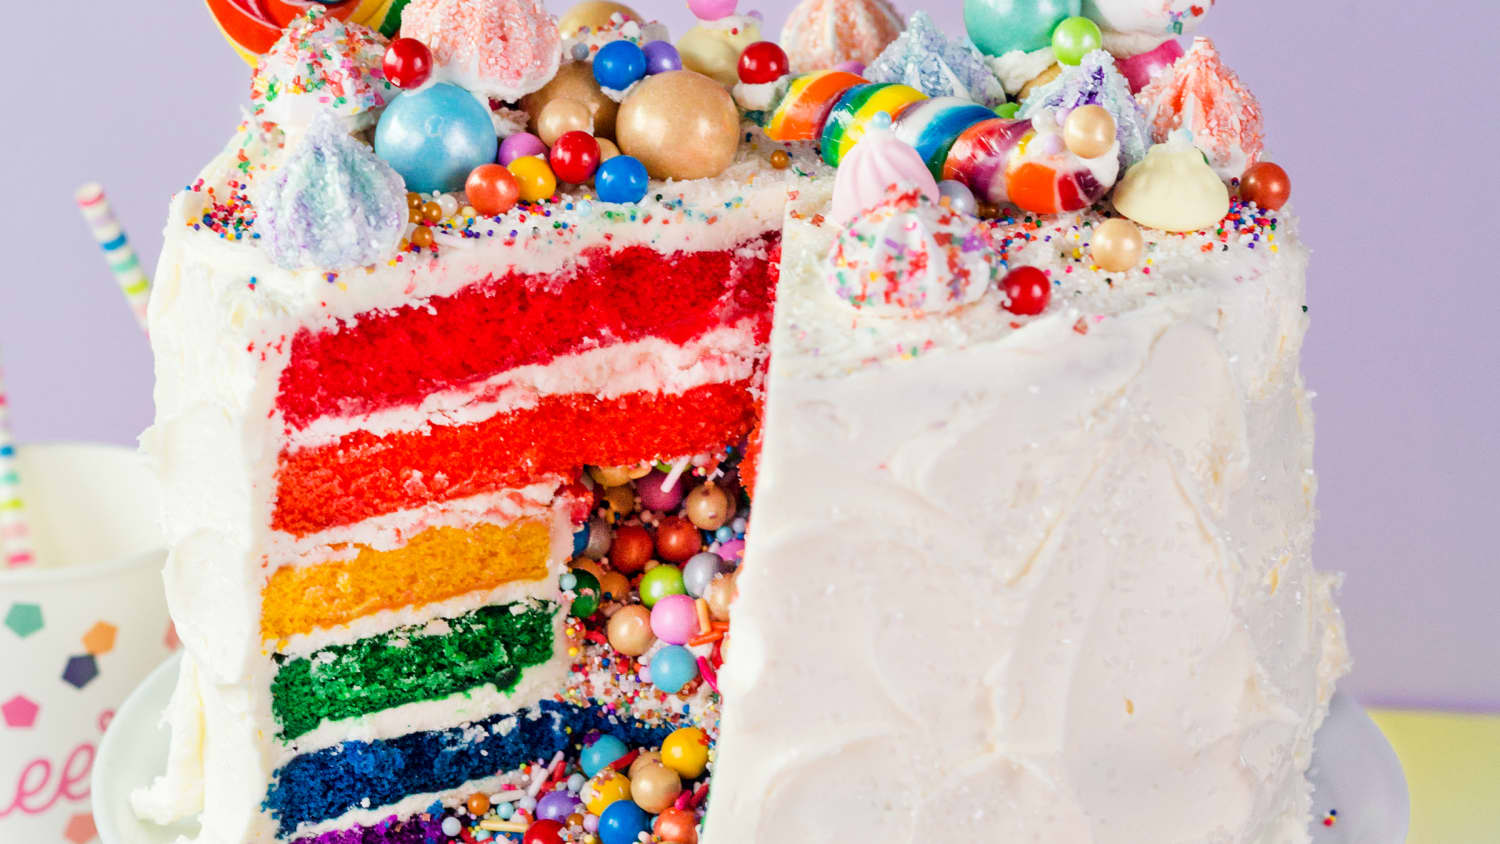 How To Make a Rainbow Layer Cake with a Candy Surprise Inside | Kitchn